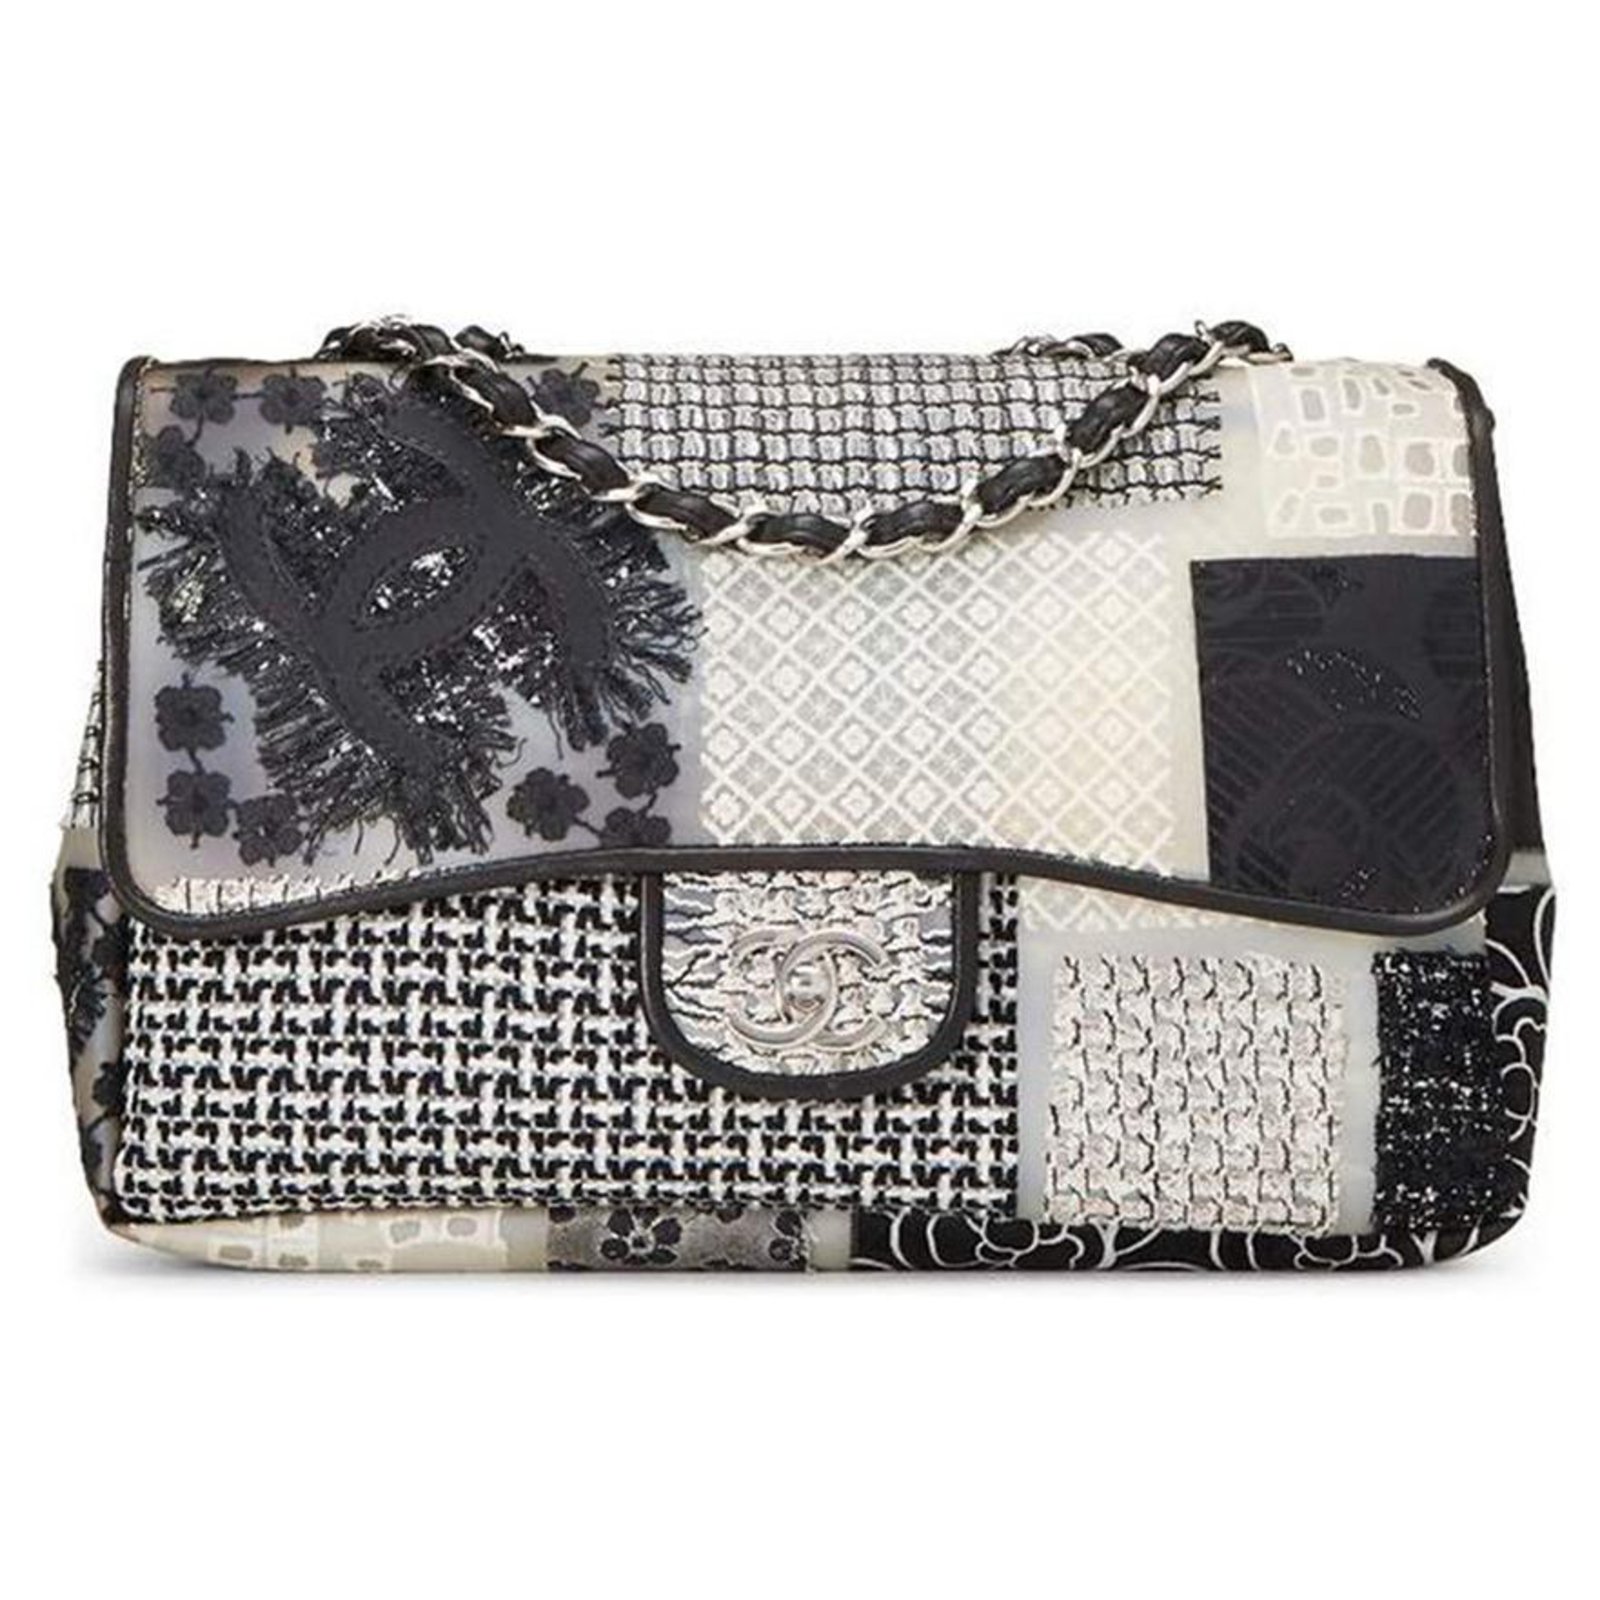 Timeless Chanel Classic Jumbo new in PVC patchwork, leather and